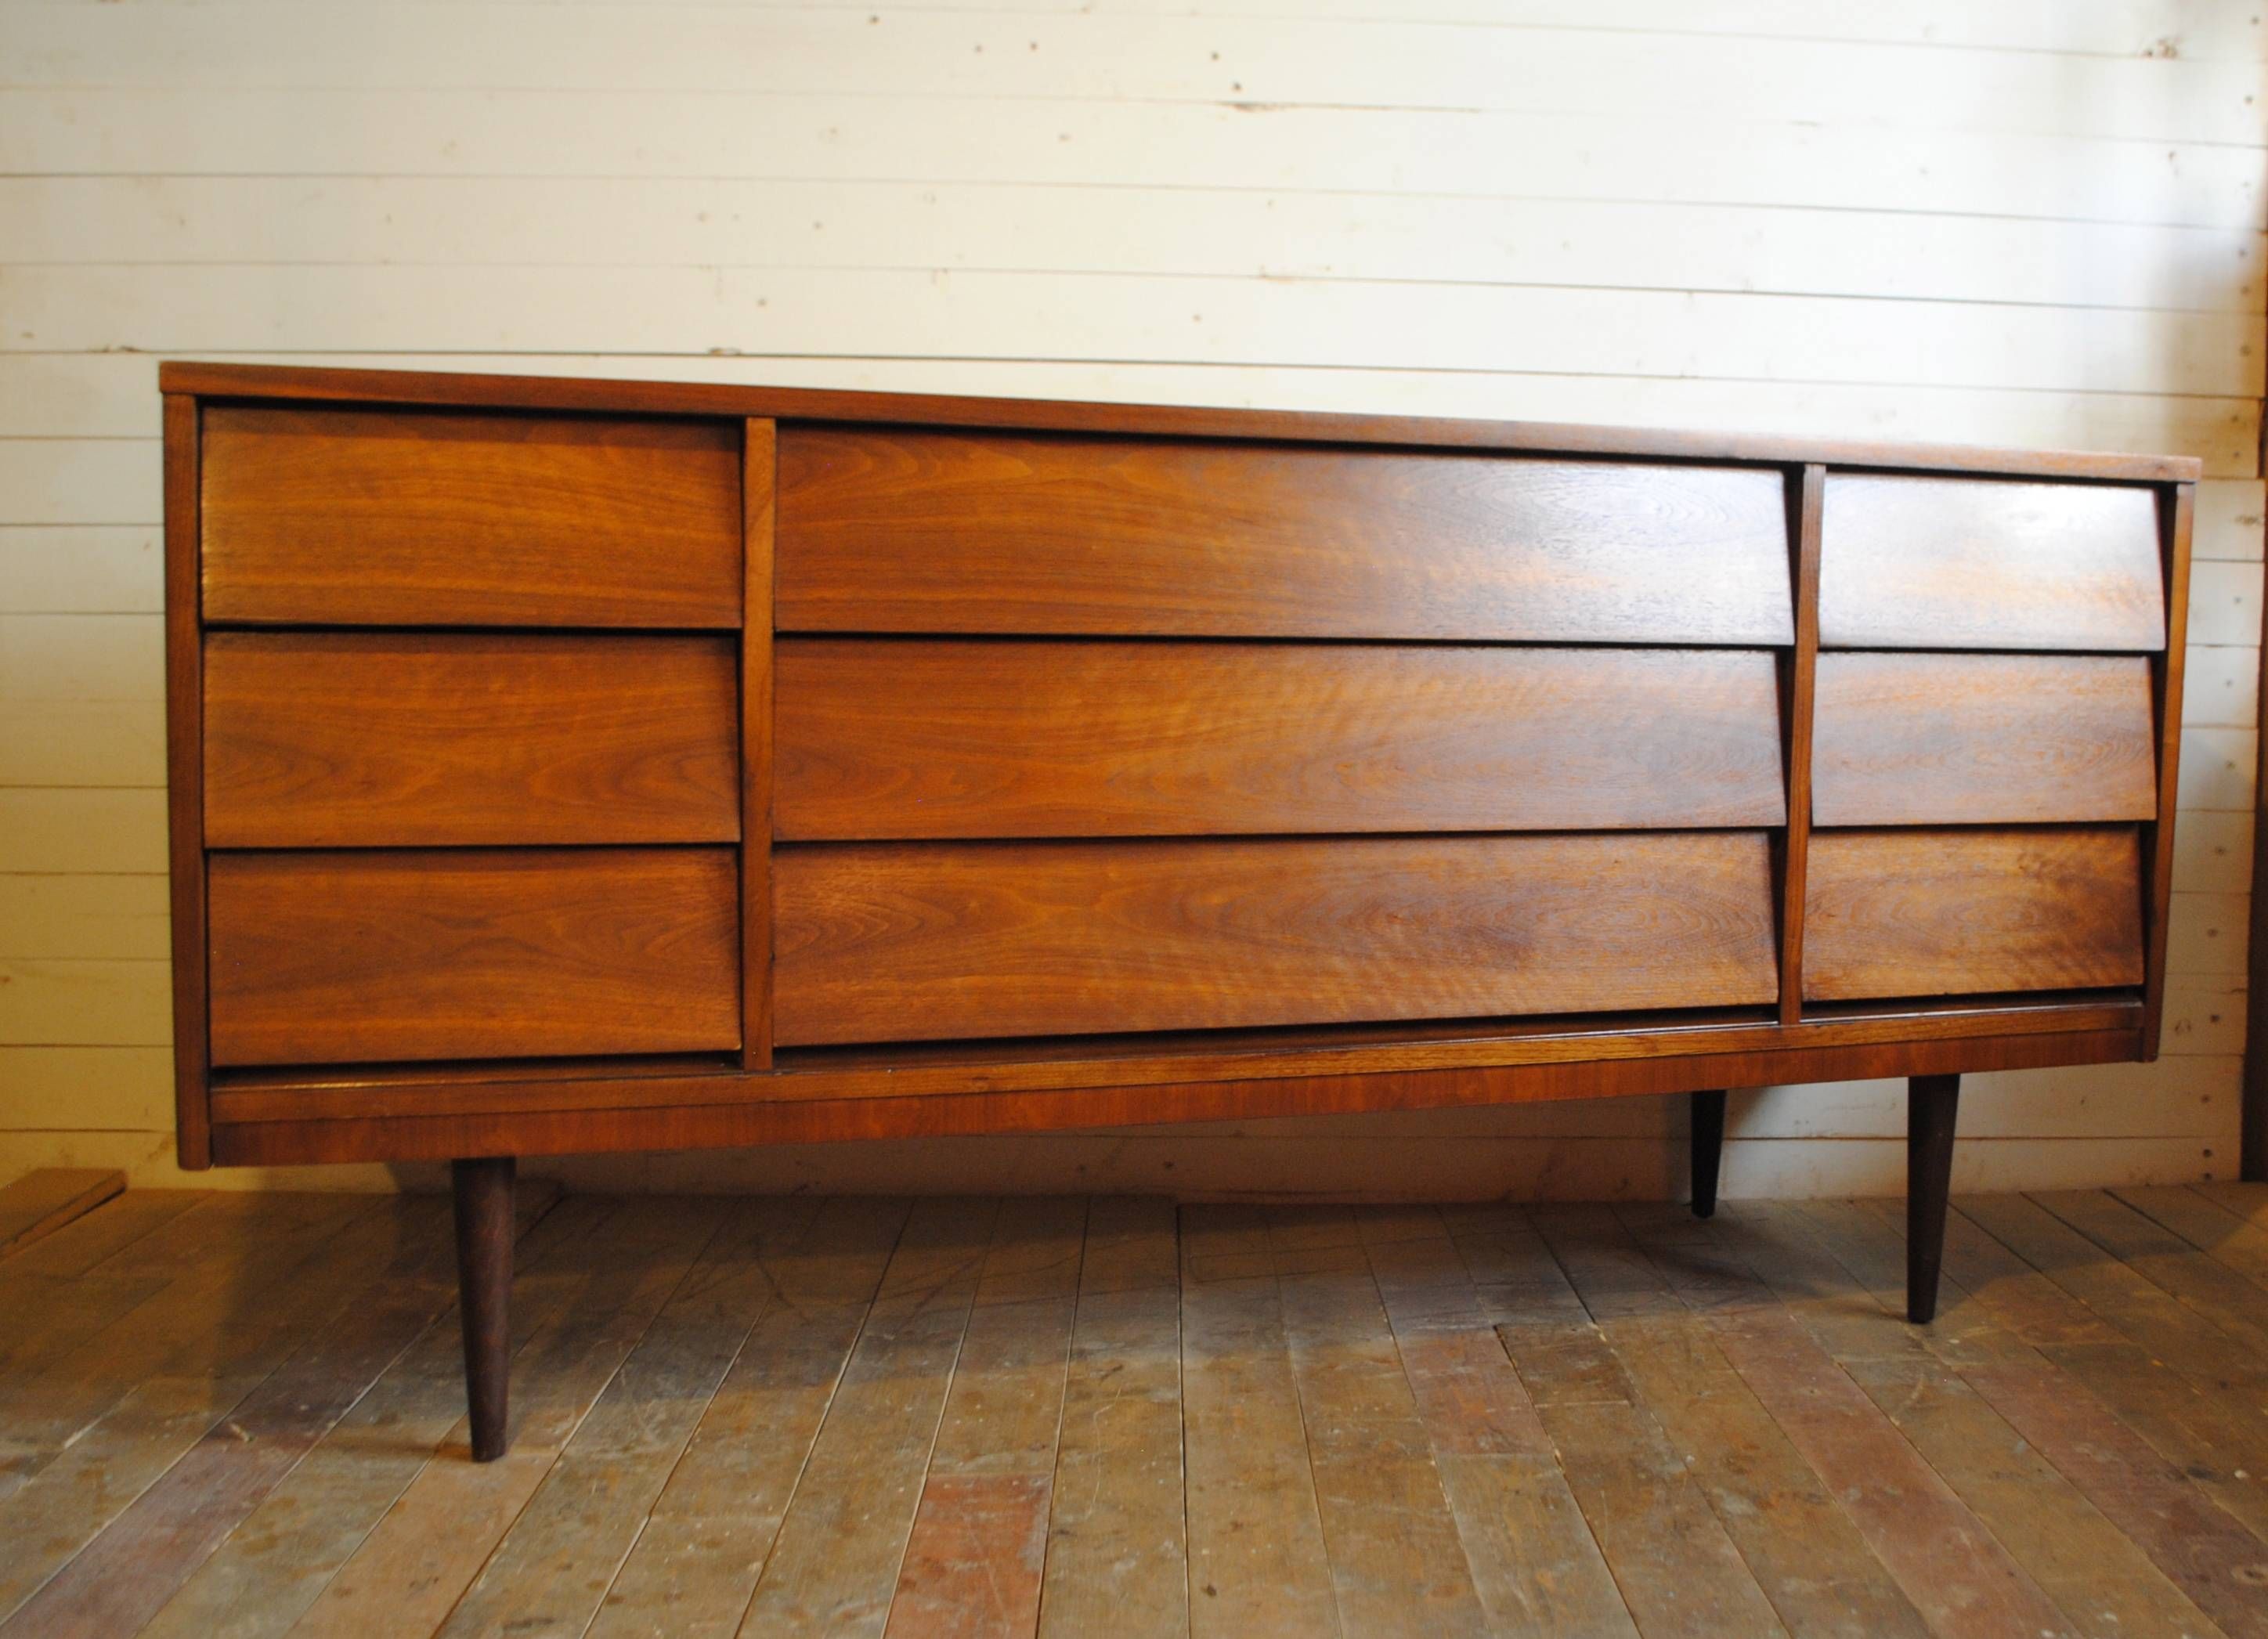 Modern Credenzas Sideboards Cute Mid Century Modern Credenza For In Most Popular Credenza Sideboards (View 6 of 15)